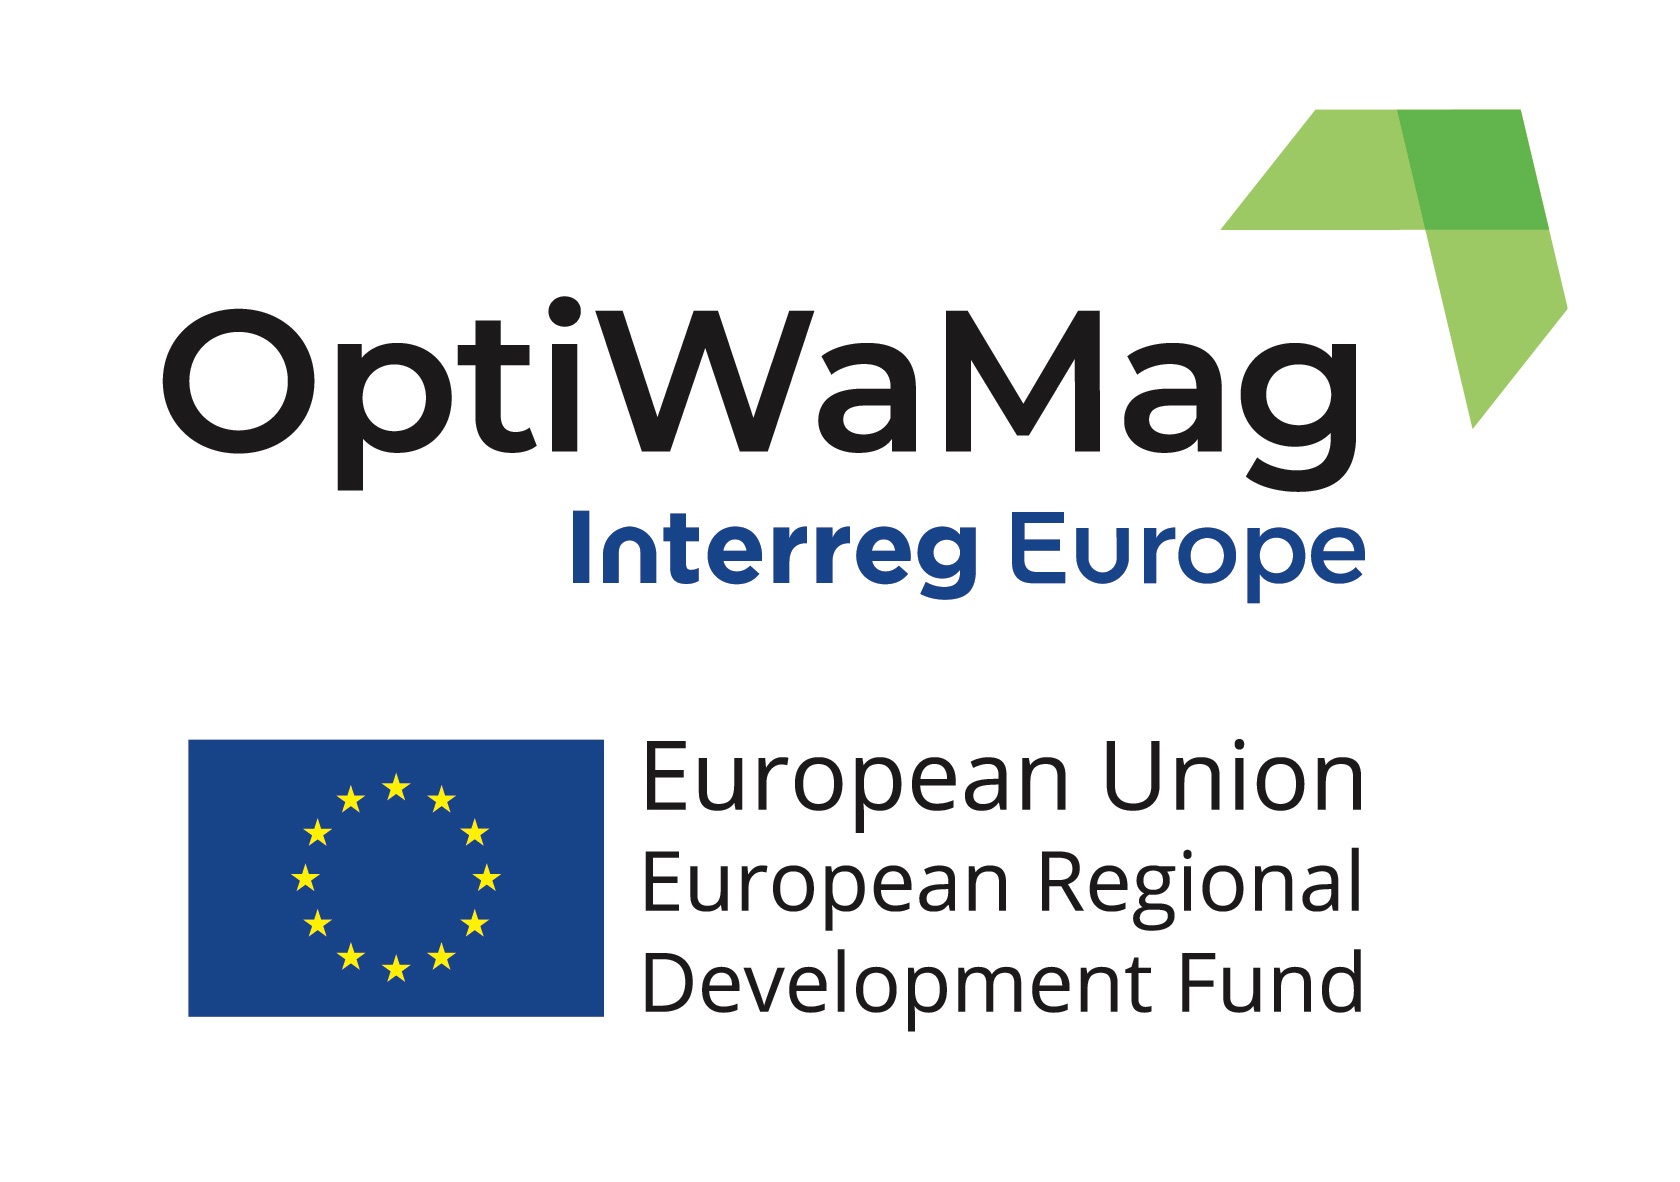 Project Optiwamag has been going on for 20 months!